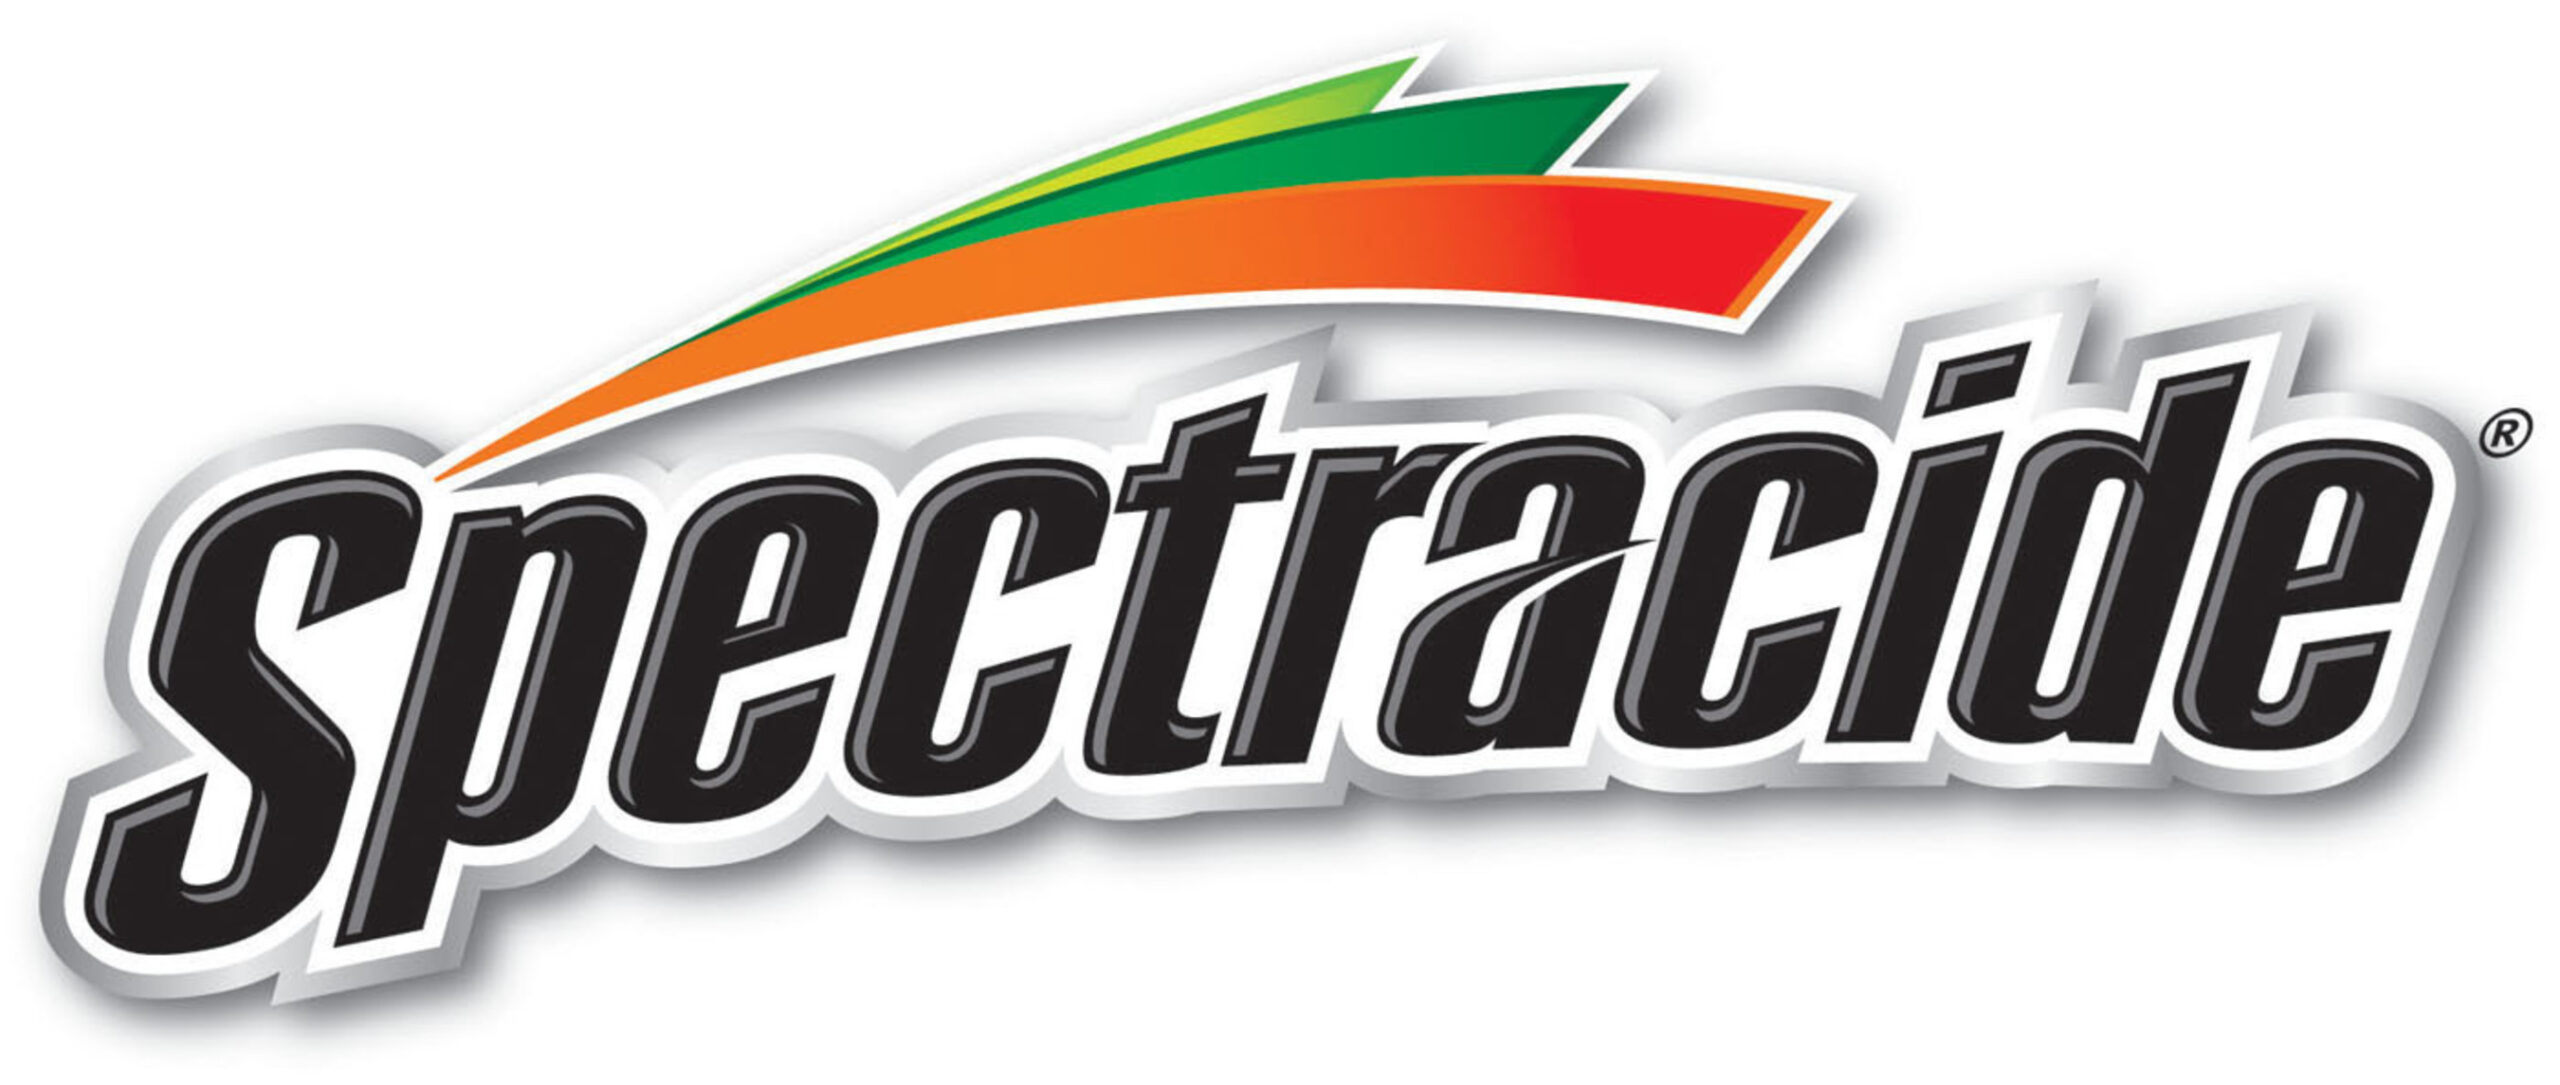 Spectracide Logo | Spectracide Products Sold at Four Star Supply